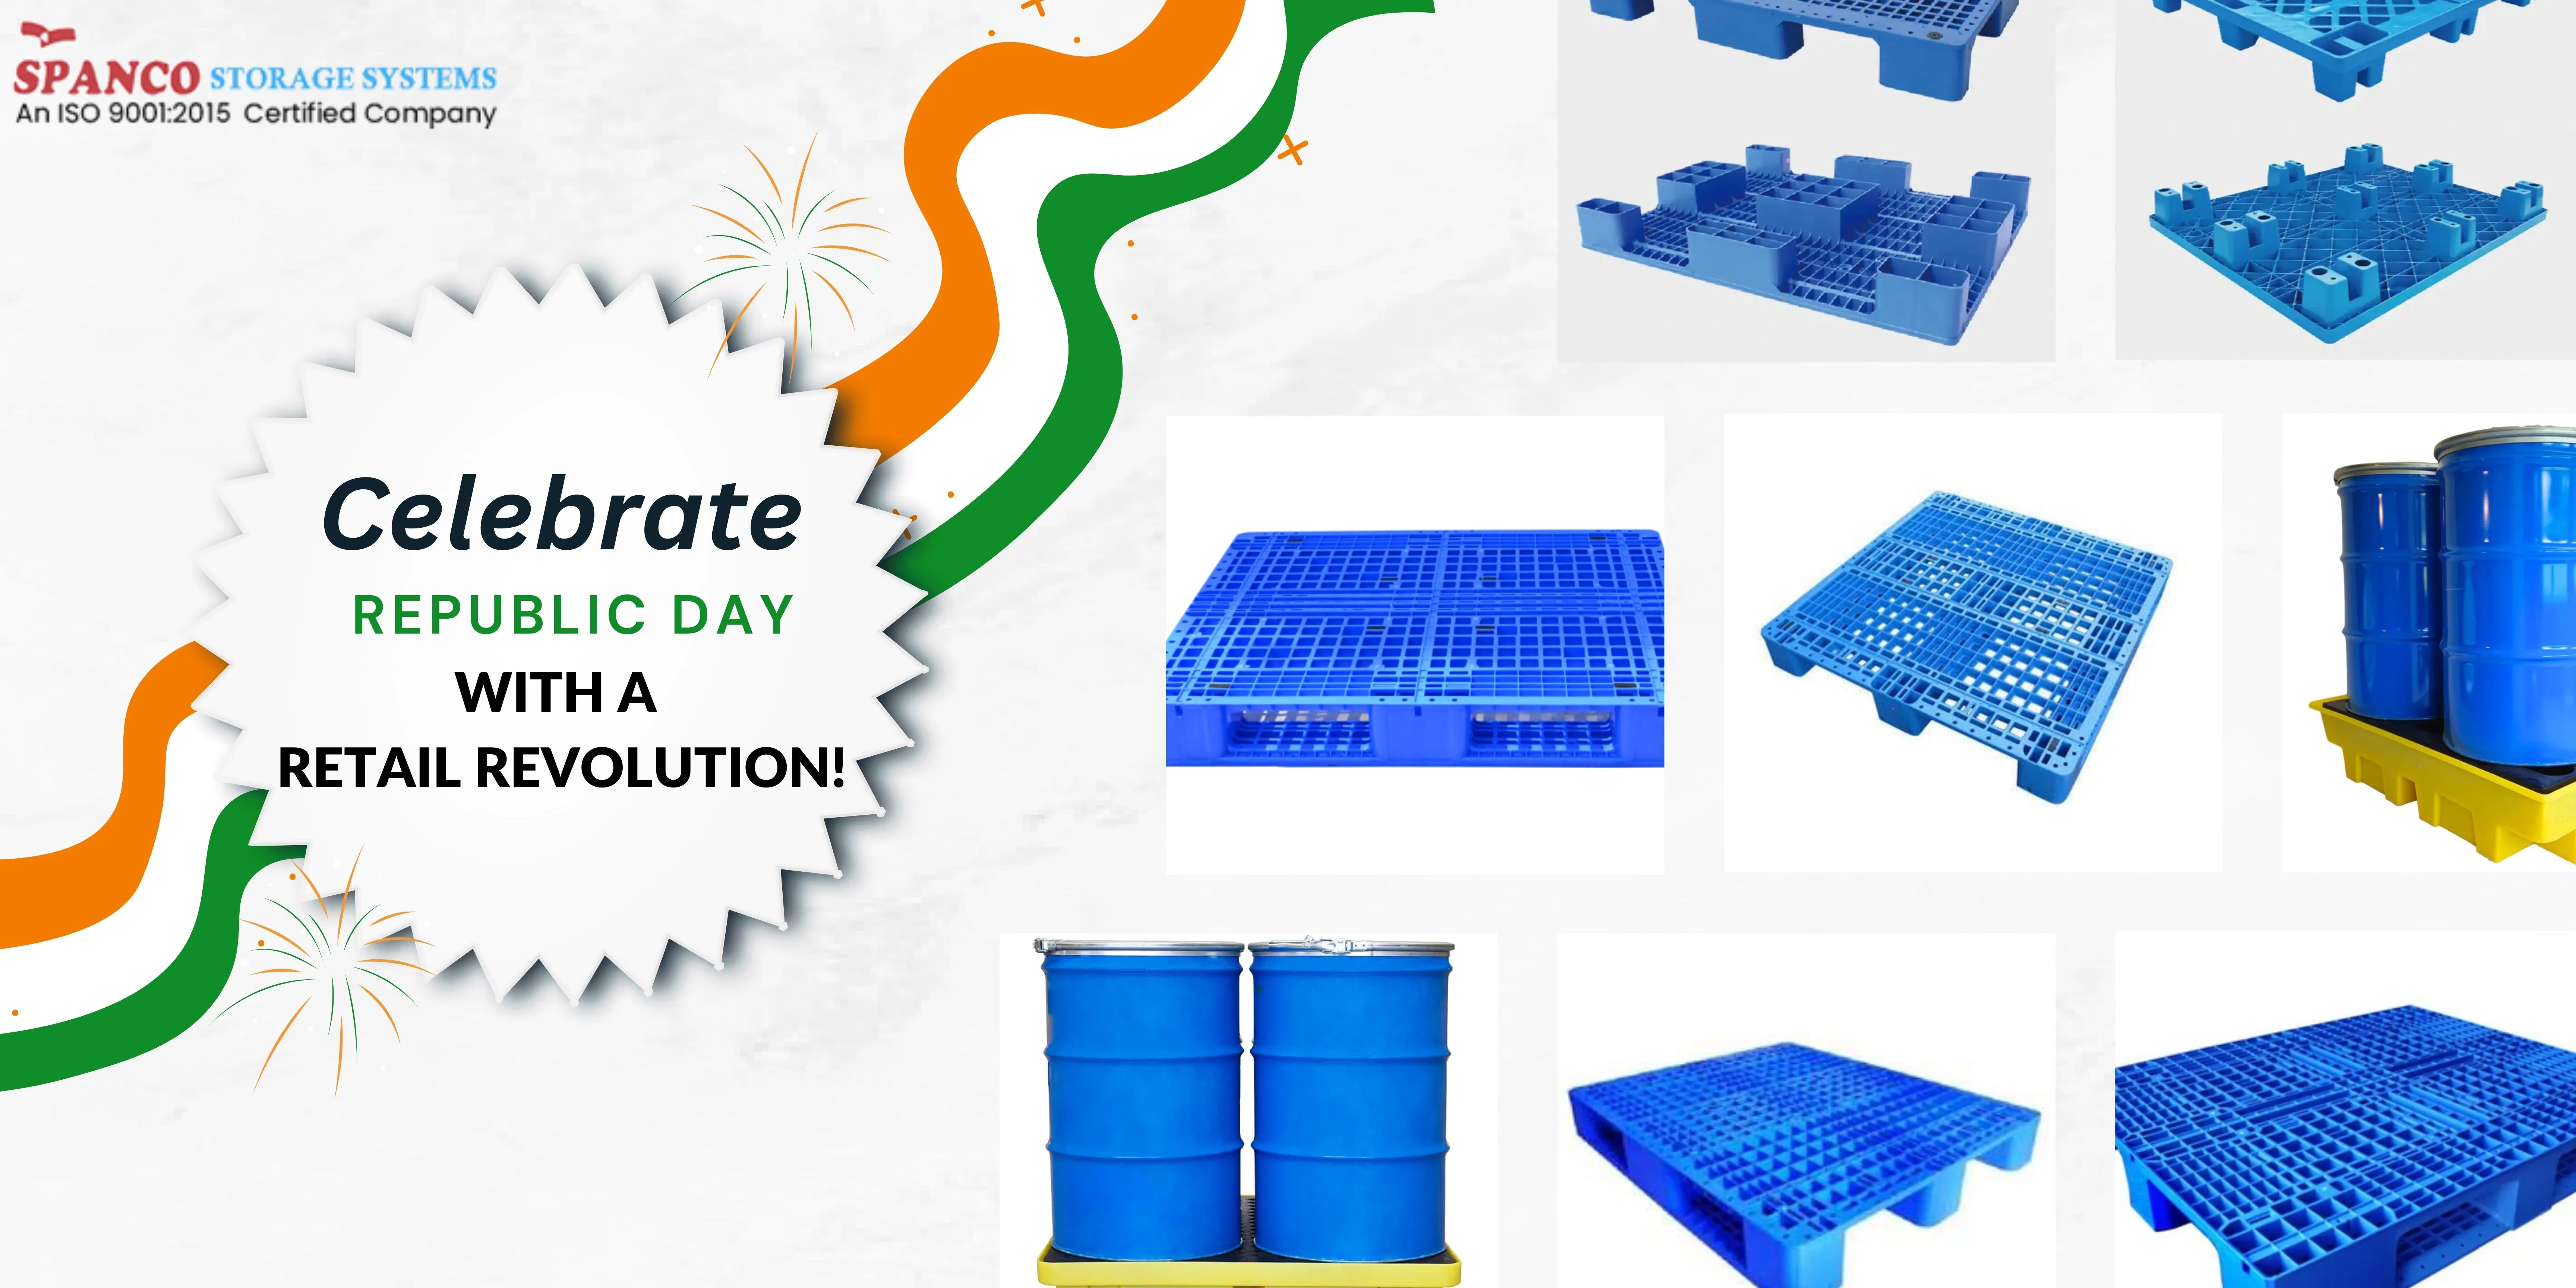 Celebrate Republic Day with a Retail Revolution!